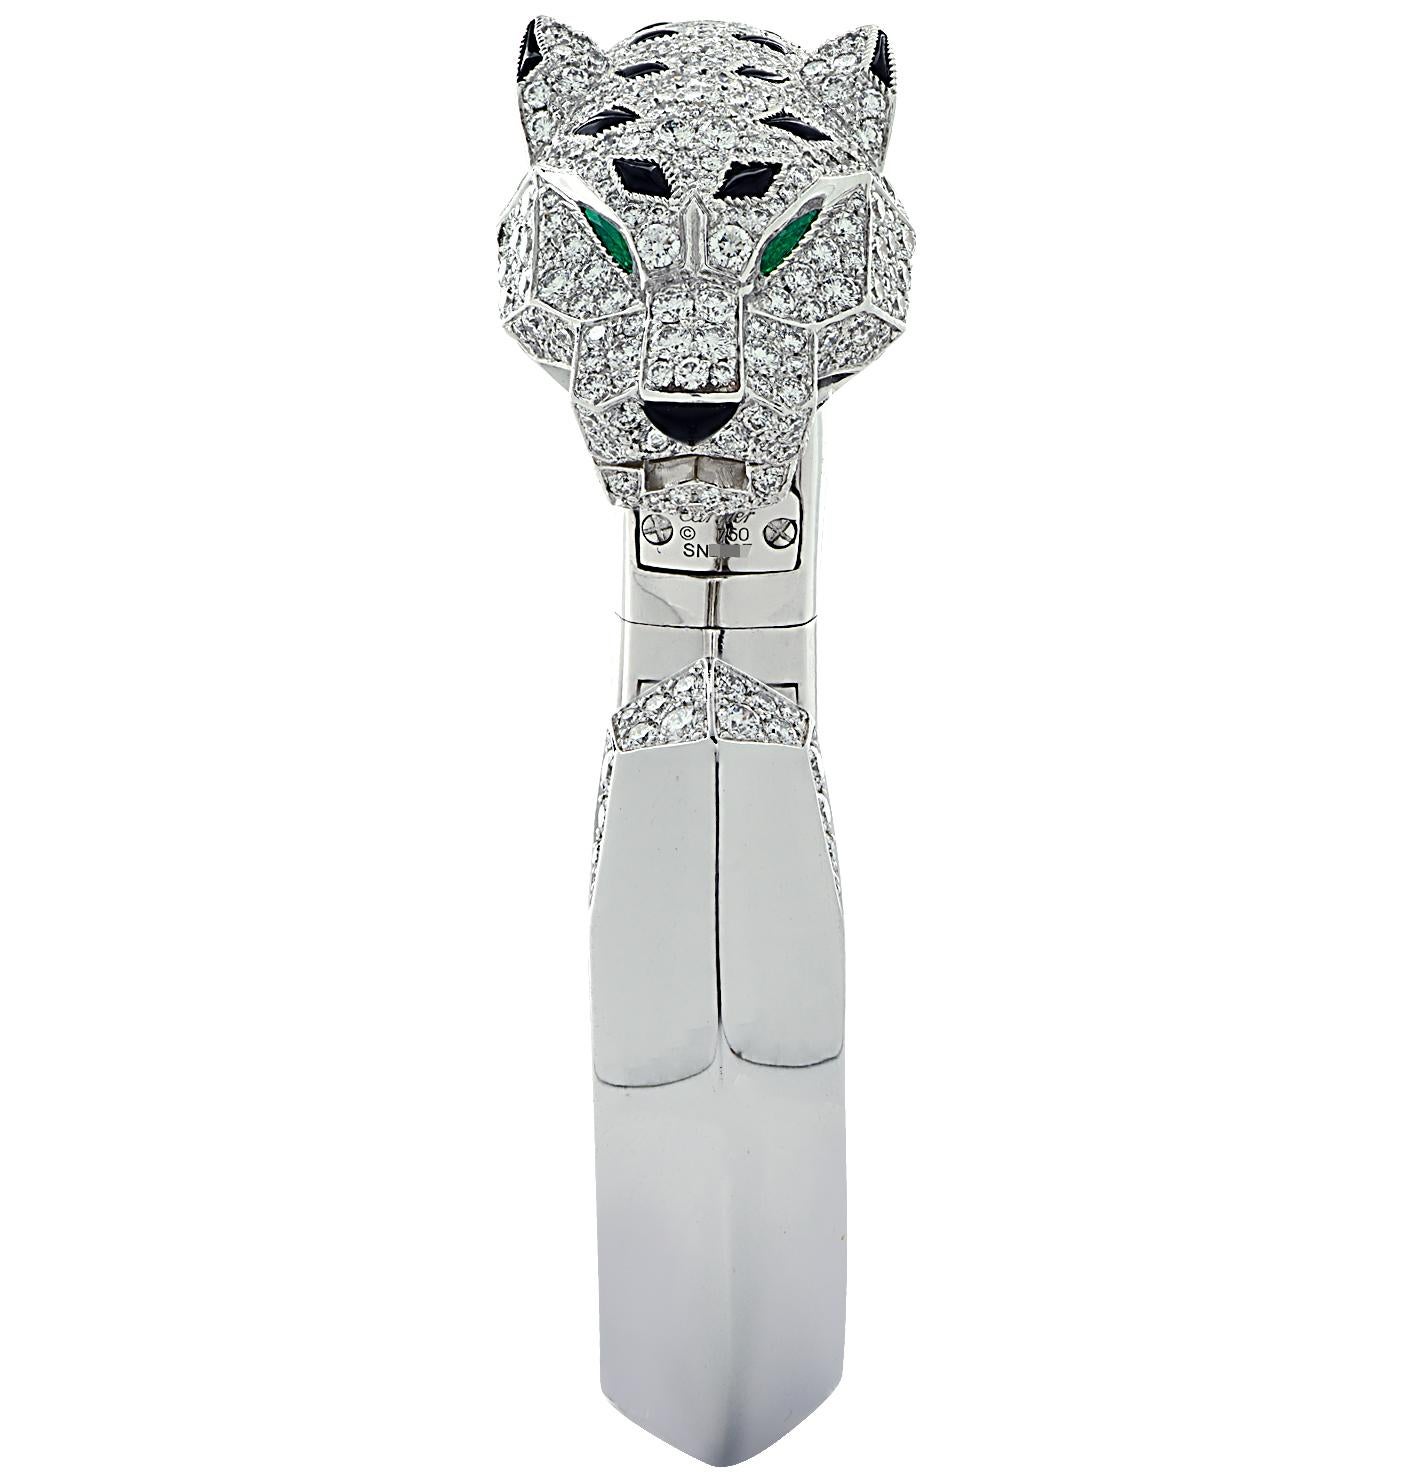 Sensational Panthere De Cartier Bracelet crafted in 18 karat white gold featuring round brilliant cut diamonds weighing approximately 4.30 carats total D-E color, VVS clarity. The panther’s head is encrusted with pave set diamonds with emeralds eyes